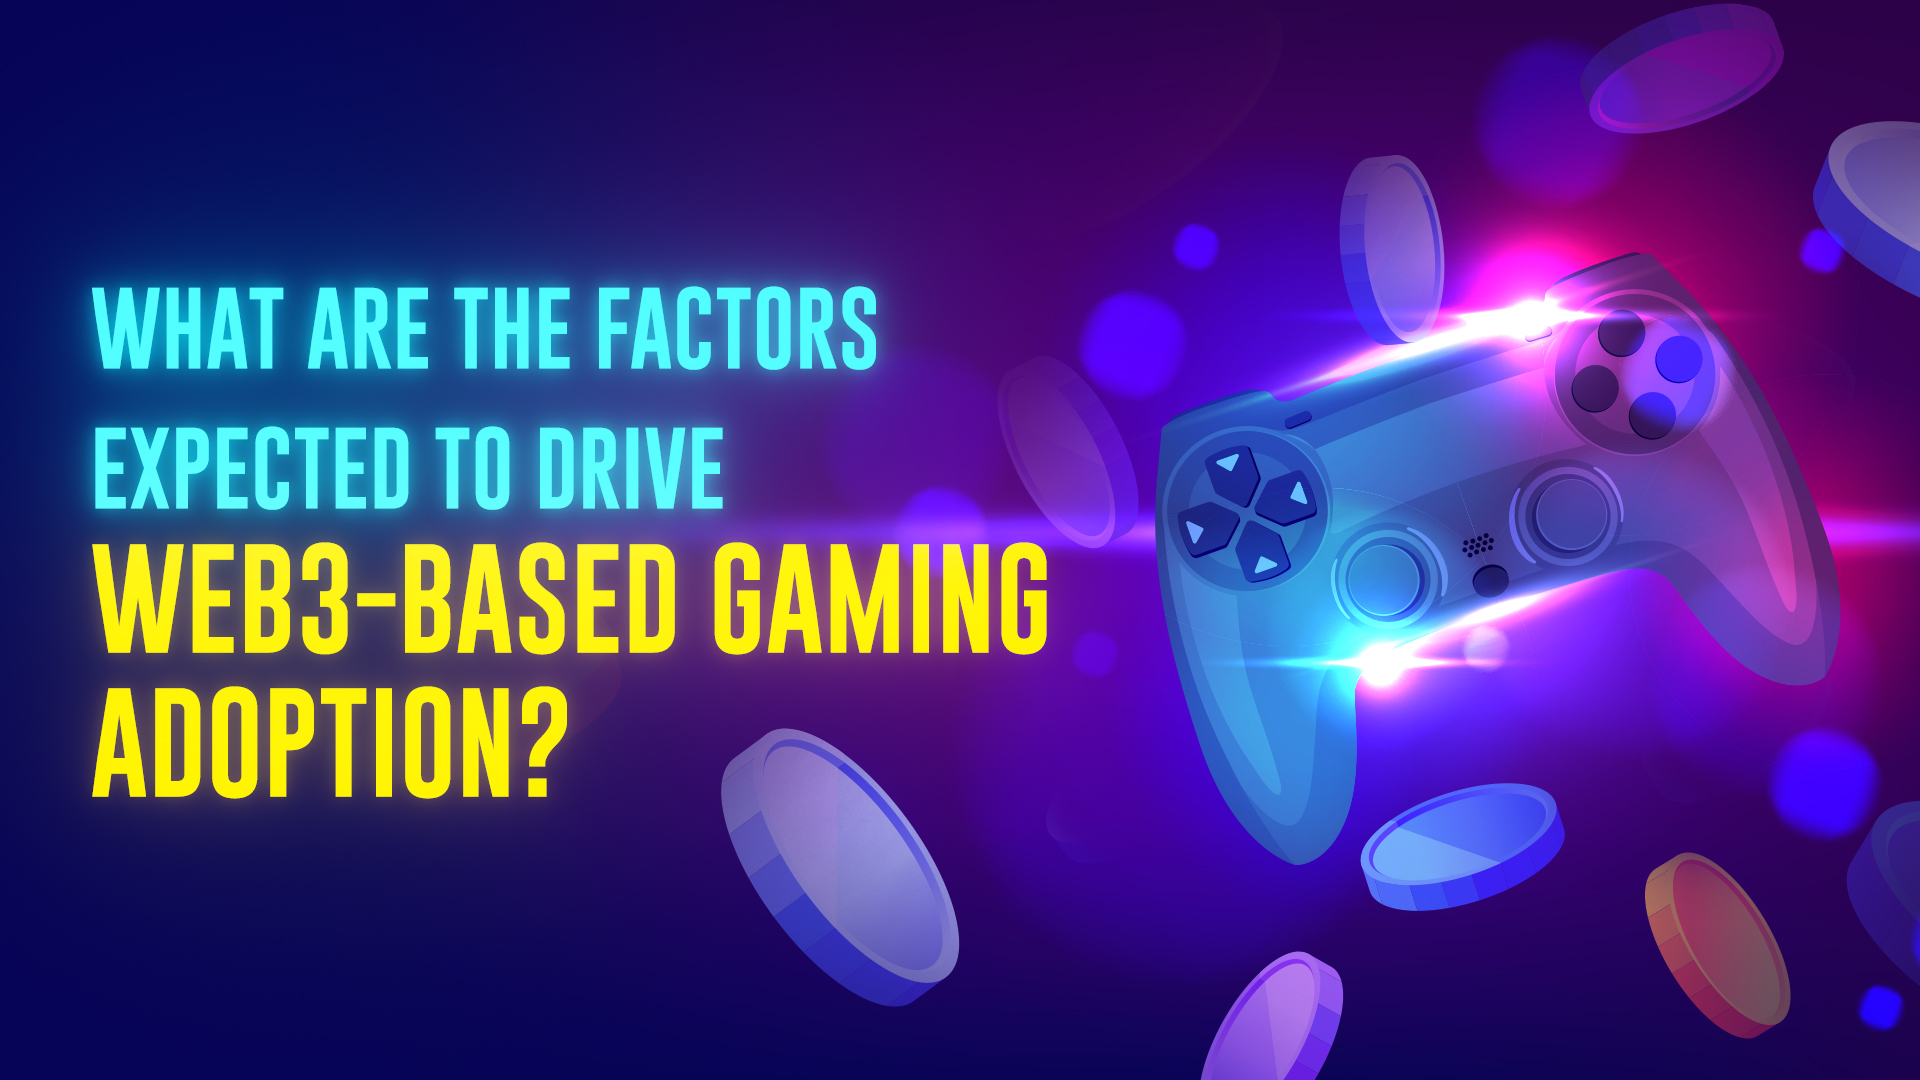 What Are The Factors Expected To Drive Web3-Based Gaming Adoption?